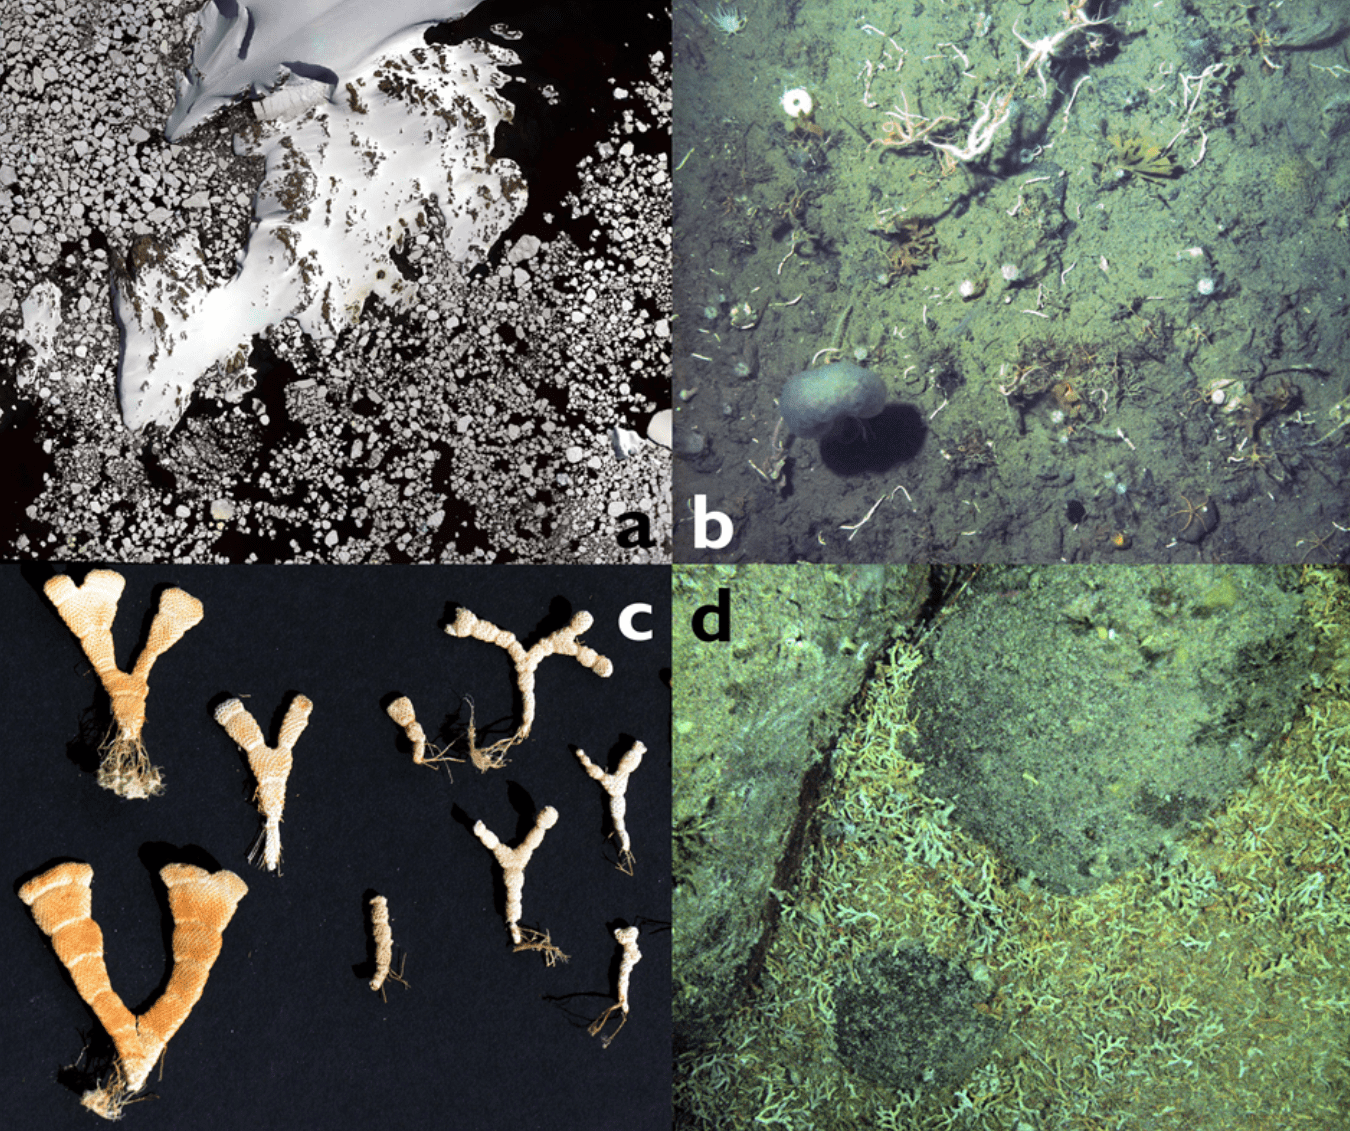 a) Satellite image showing fast disintegration of sea ice over a polar continental shelf; b) Zoobenthos on an Antarctic continental shelf; c) Examples of sea mosses (specimens on the left are from an open-water location and hence have had more plankton to feed on); and d) Dead bryozoan and other benthic skeletons covering the seabed, most likely to be buried, sequestering their blue carbon in the seabed. Credit: BAS